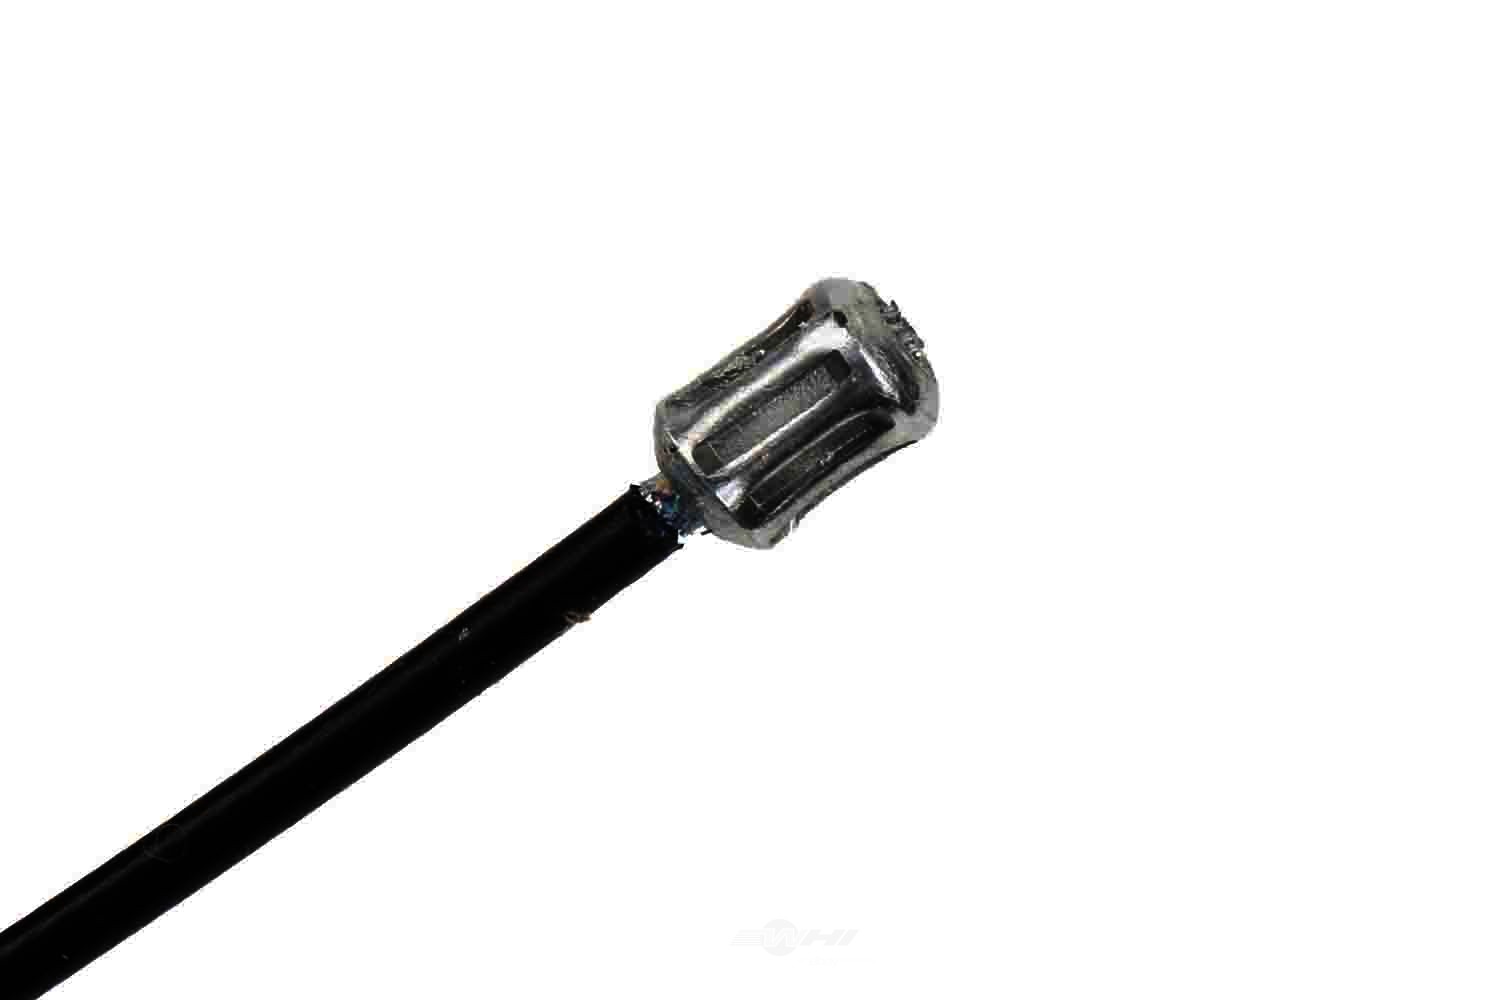 GM GENUINE PARTS - Parking Brake Cable - GMP 25830085